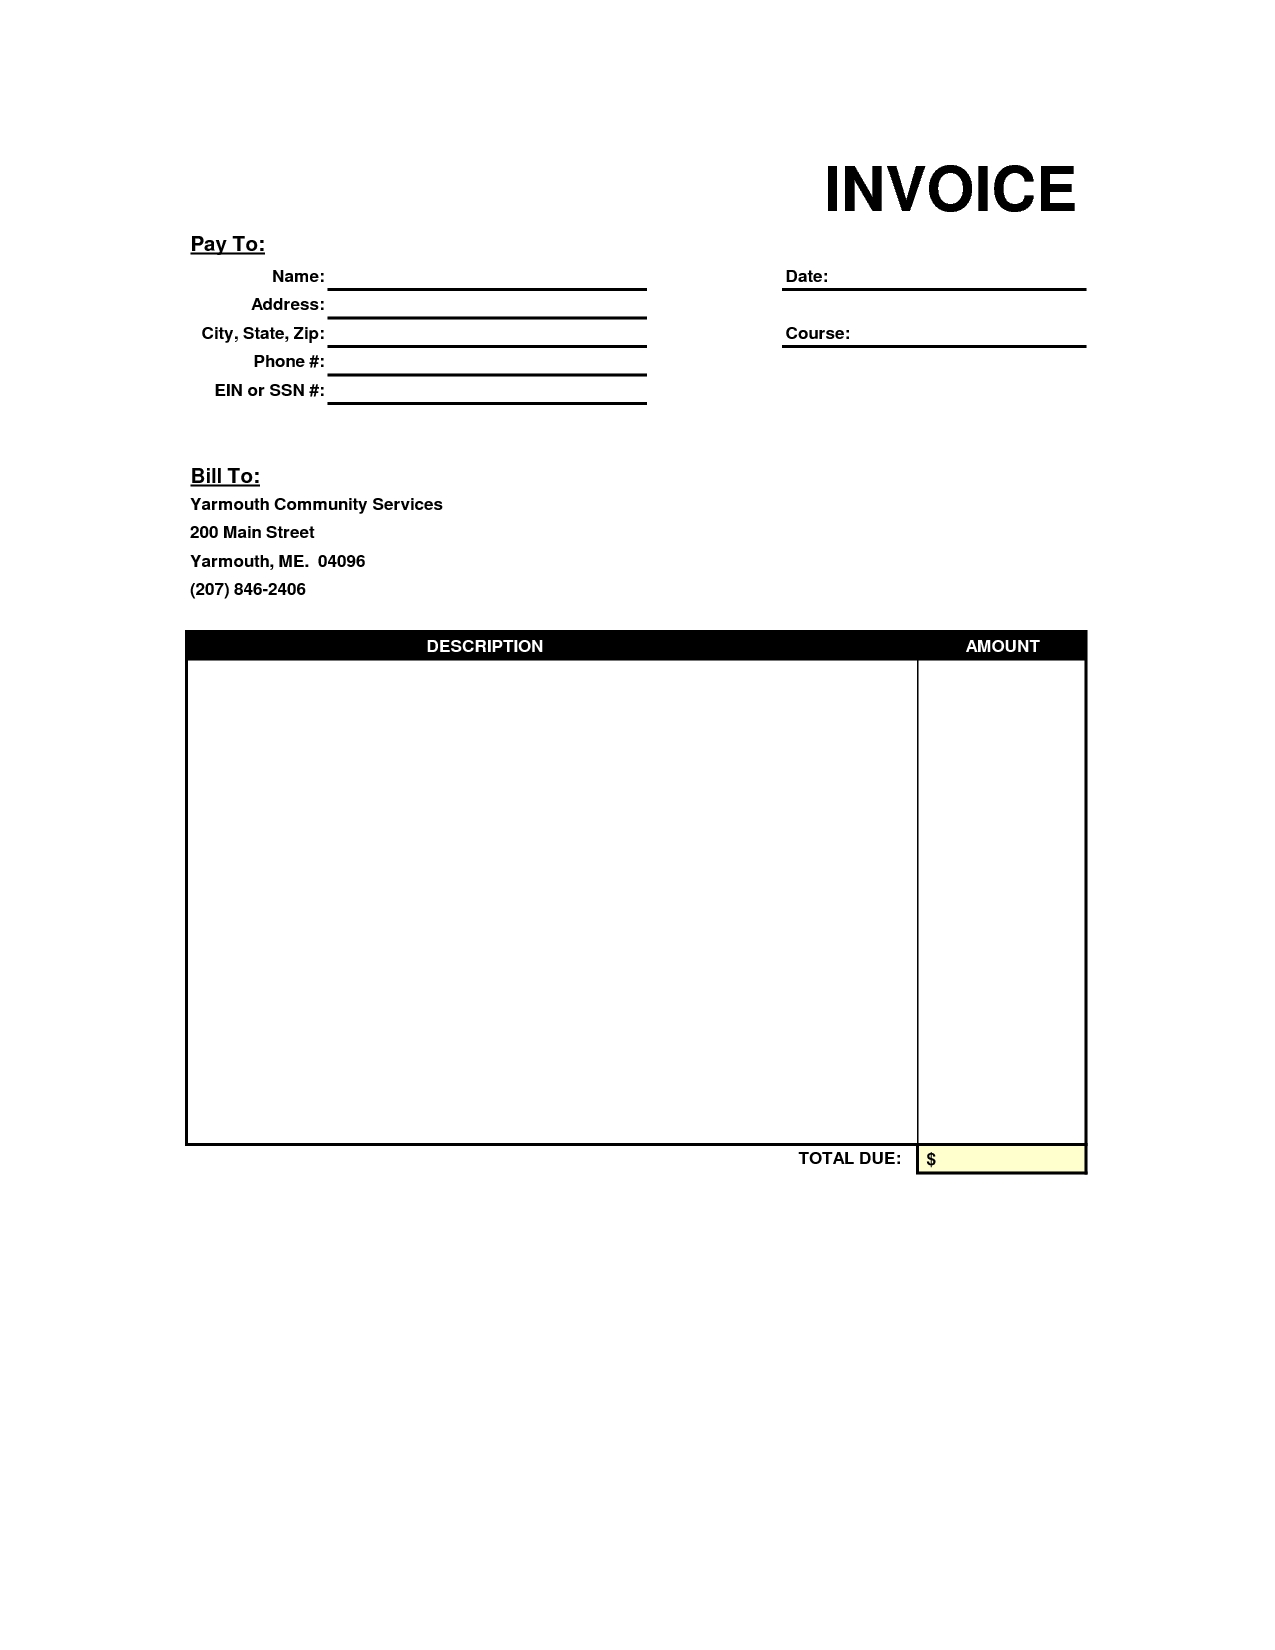 blank invoice template blank invoice free blank invoice forms